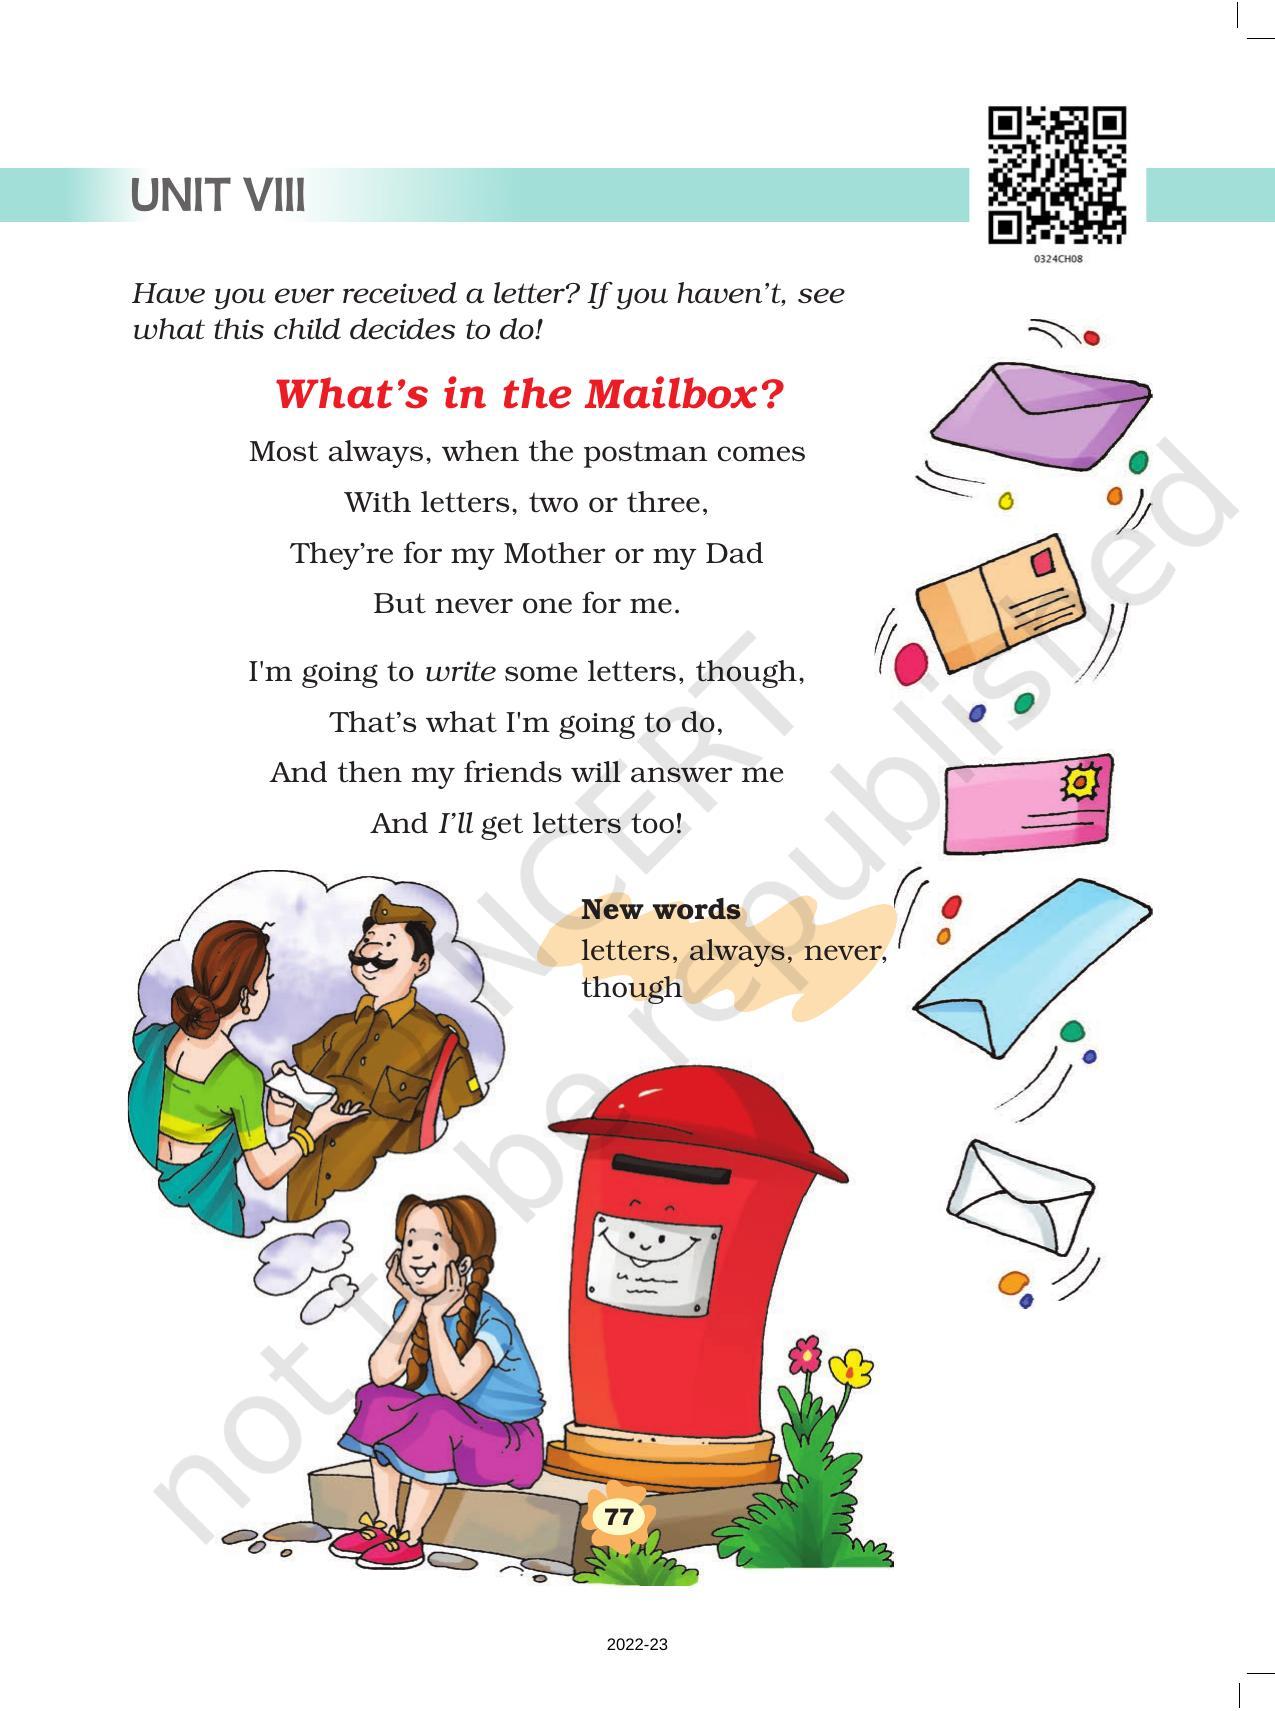 NCERT Book for Class 3 English: Unit VIII.1-What’s in the Mailbox? - Page 1